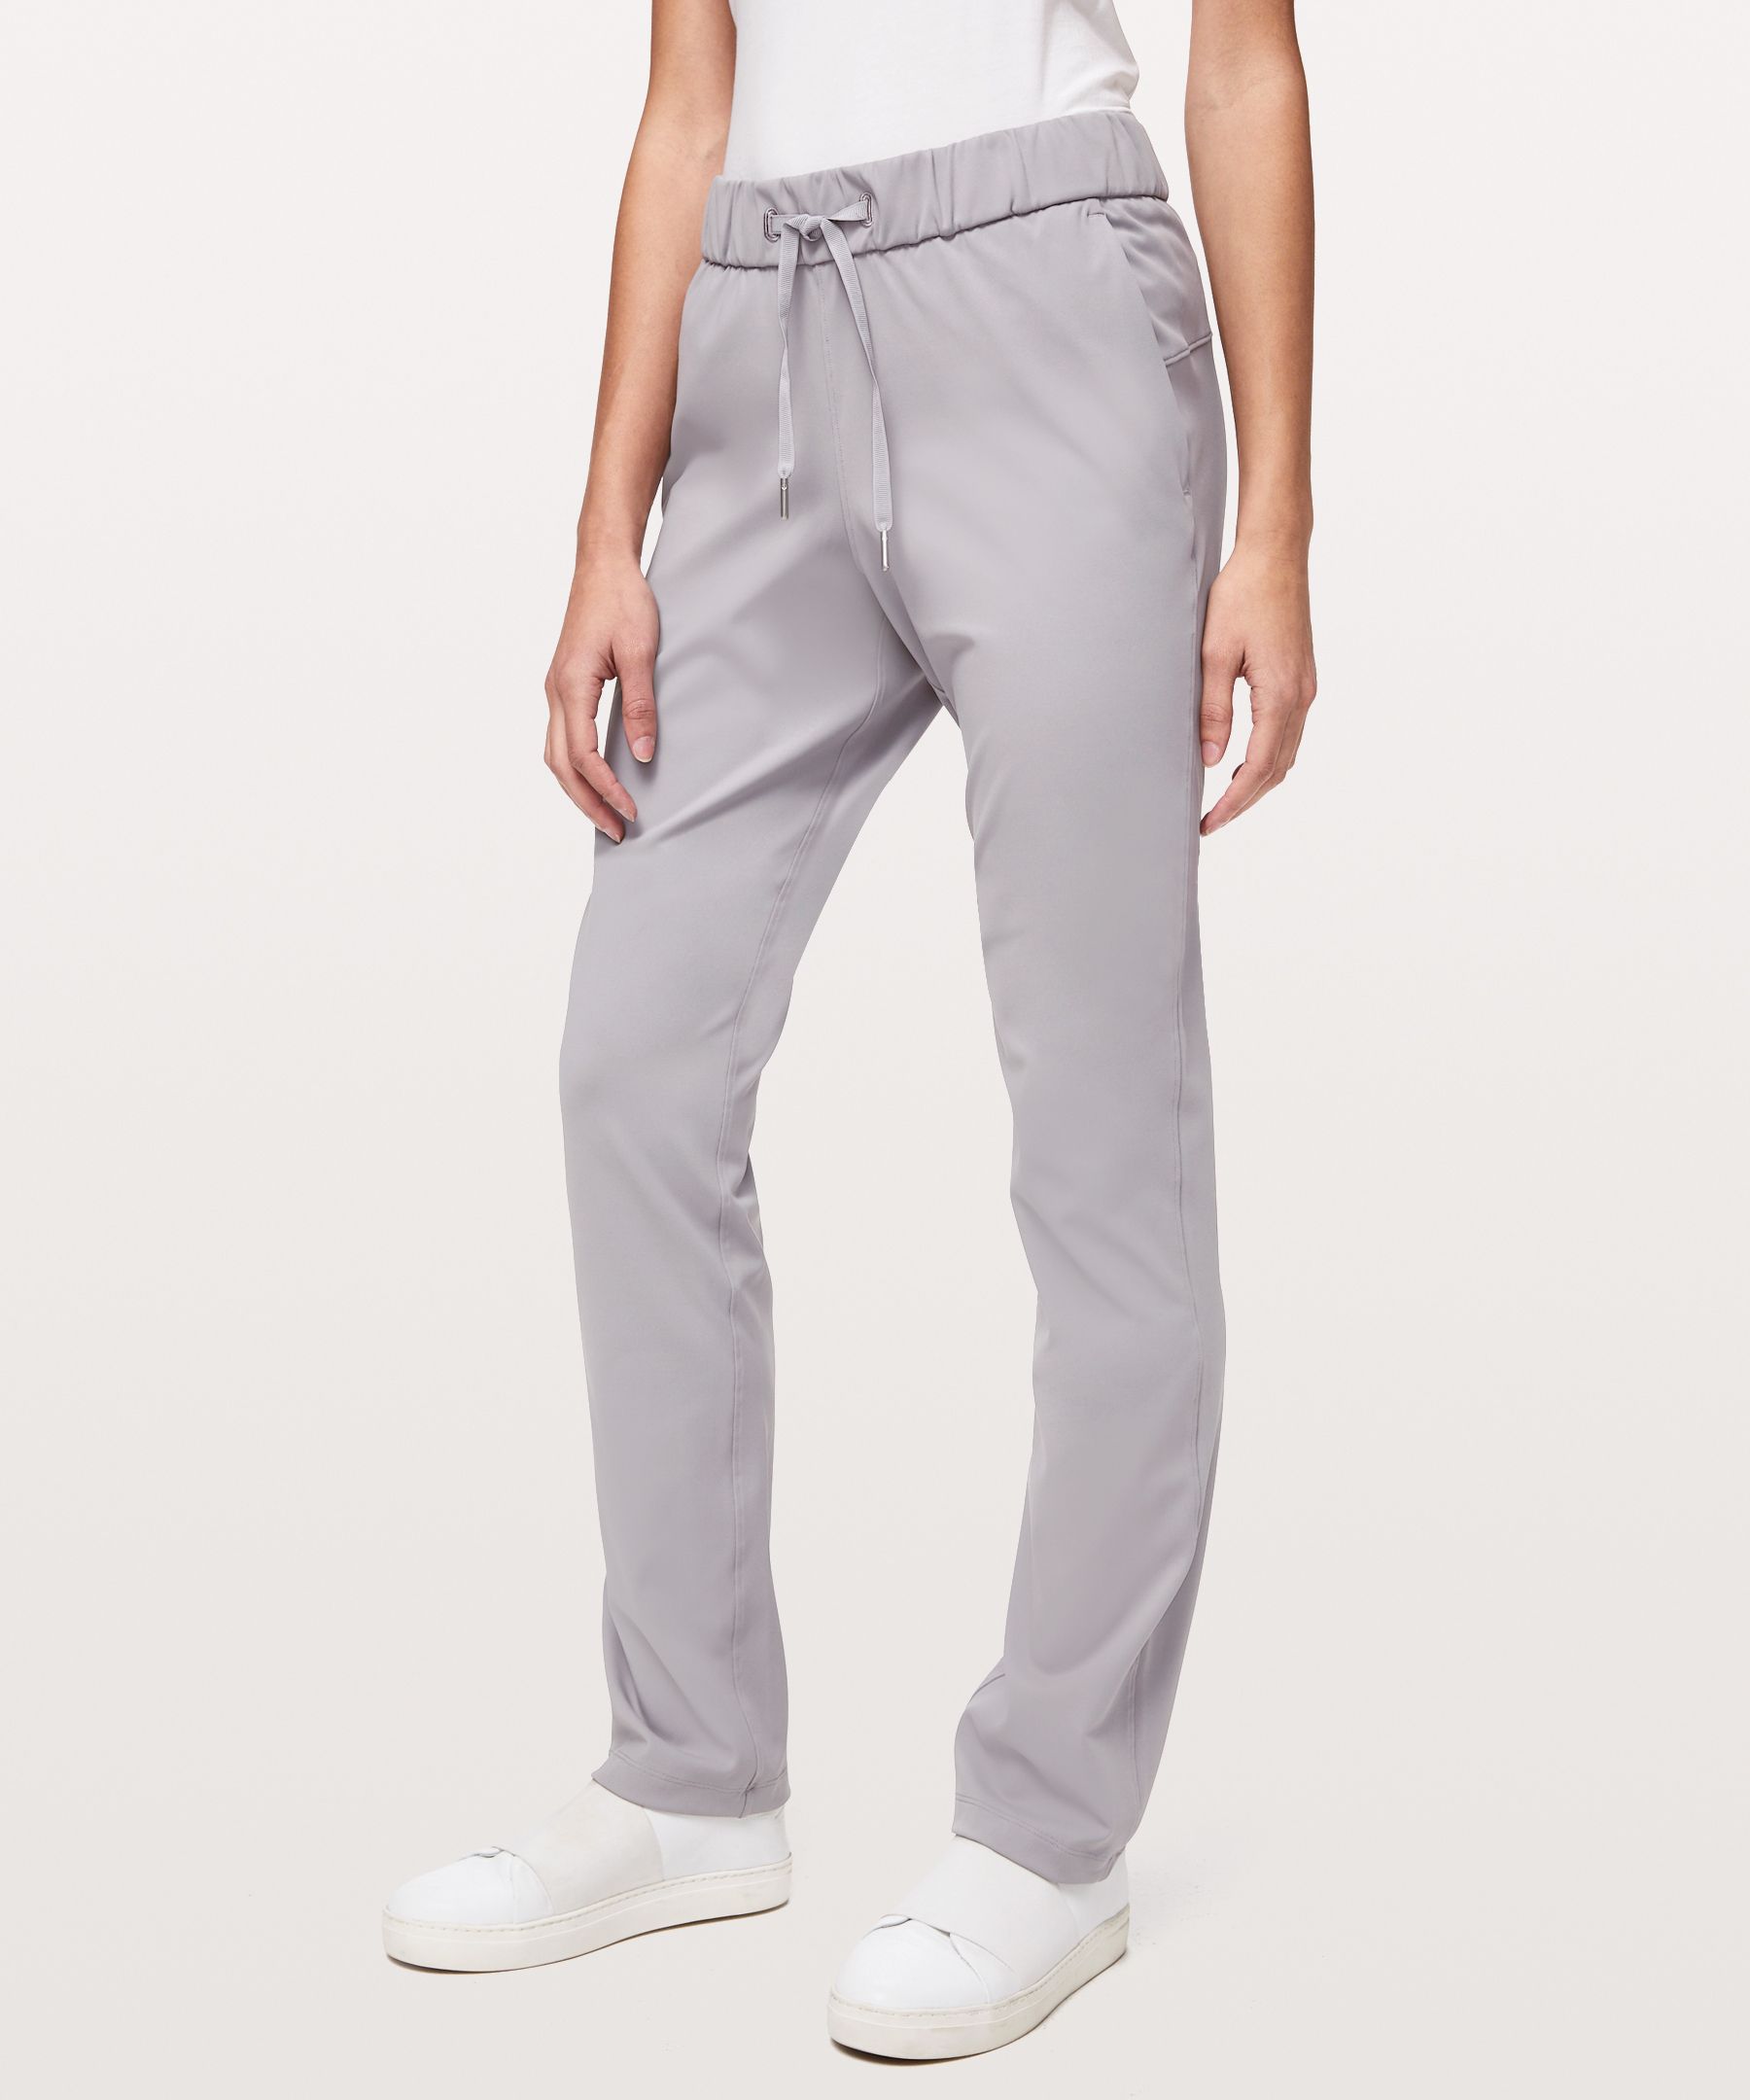 Lululemon On The Fly Pant Tall 33" *online Only In Silverscreen